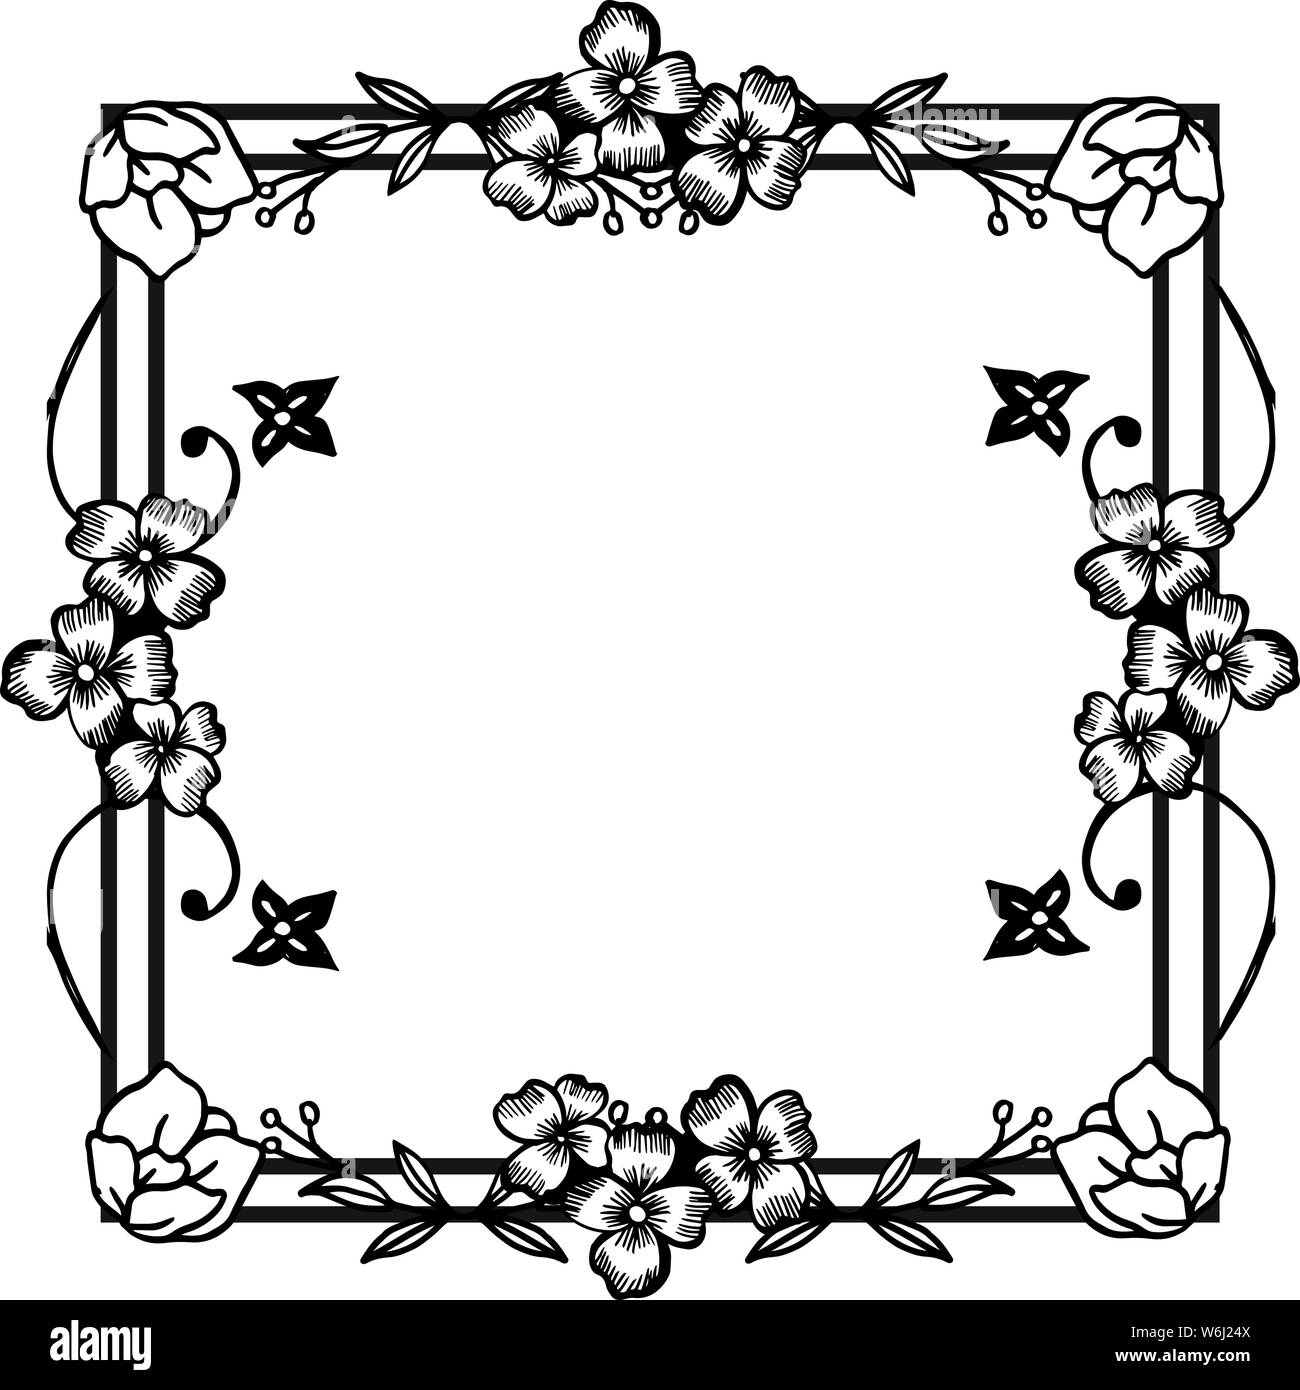 Simple Flower Frame On A White Background Design For Greeting Card Invitation Card Poster Vector Illustration Stock Vector Image Art Alamy